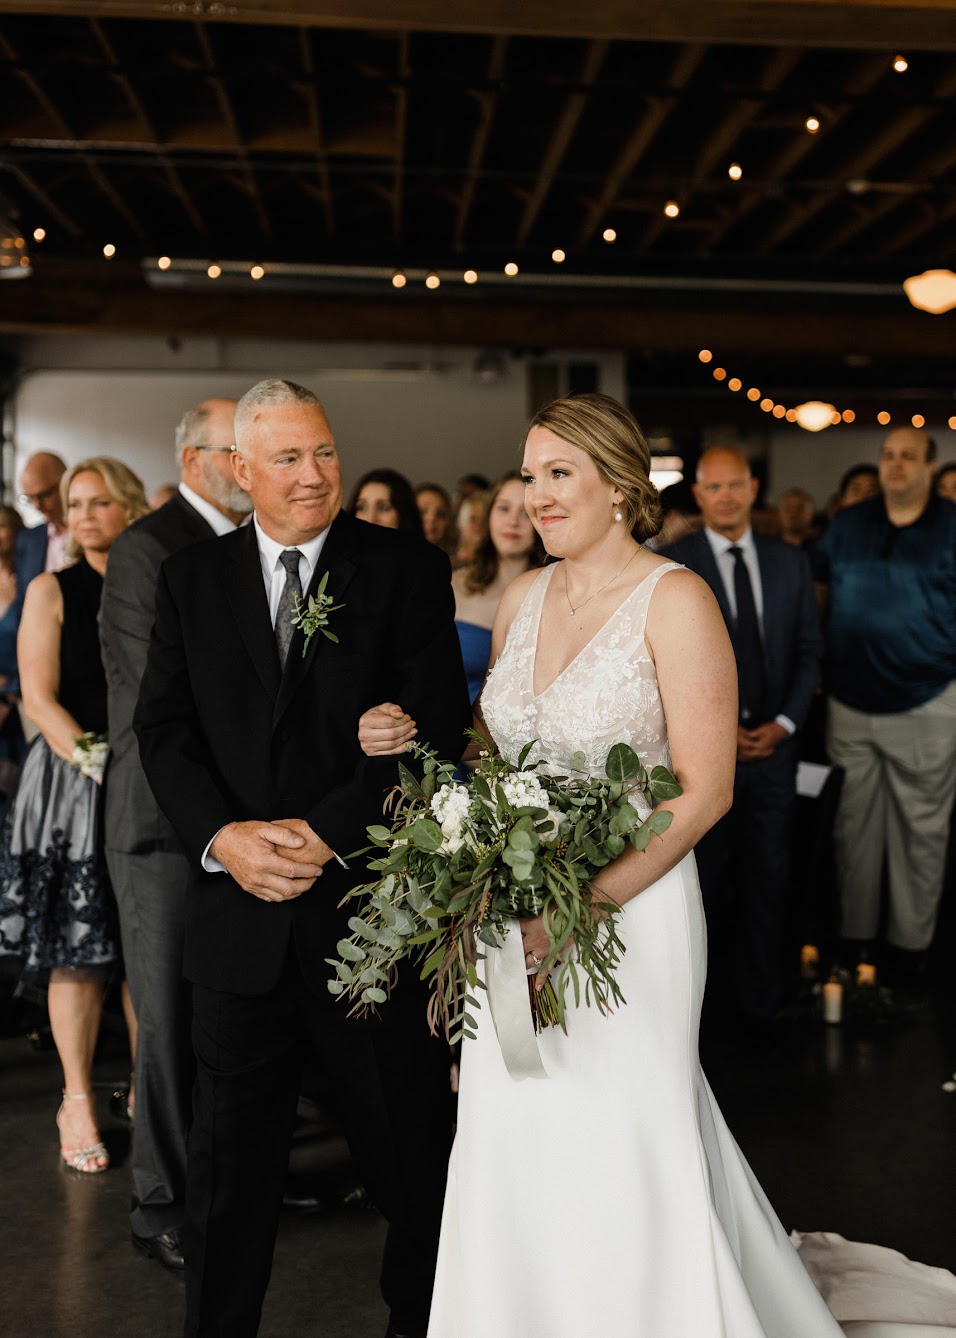 the bride walking down the aisle with her dad as she holds her bridal bouquet